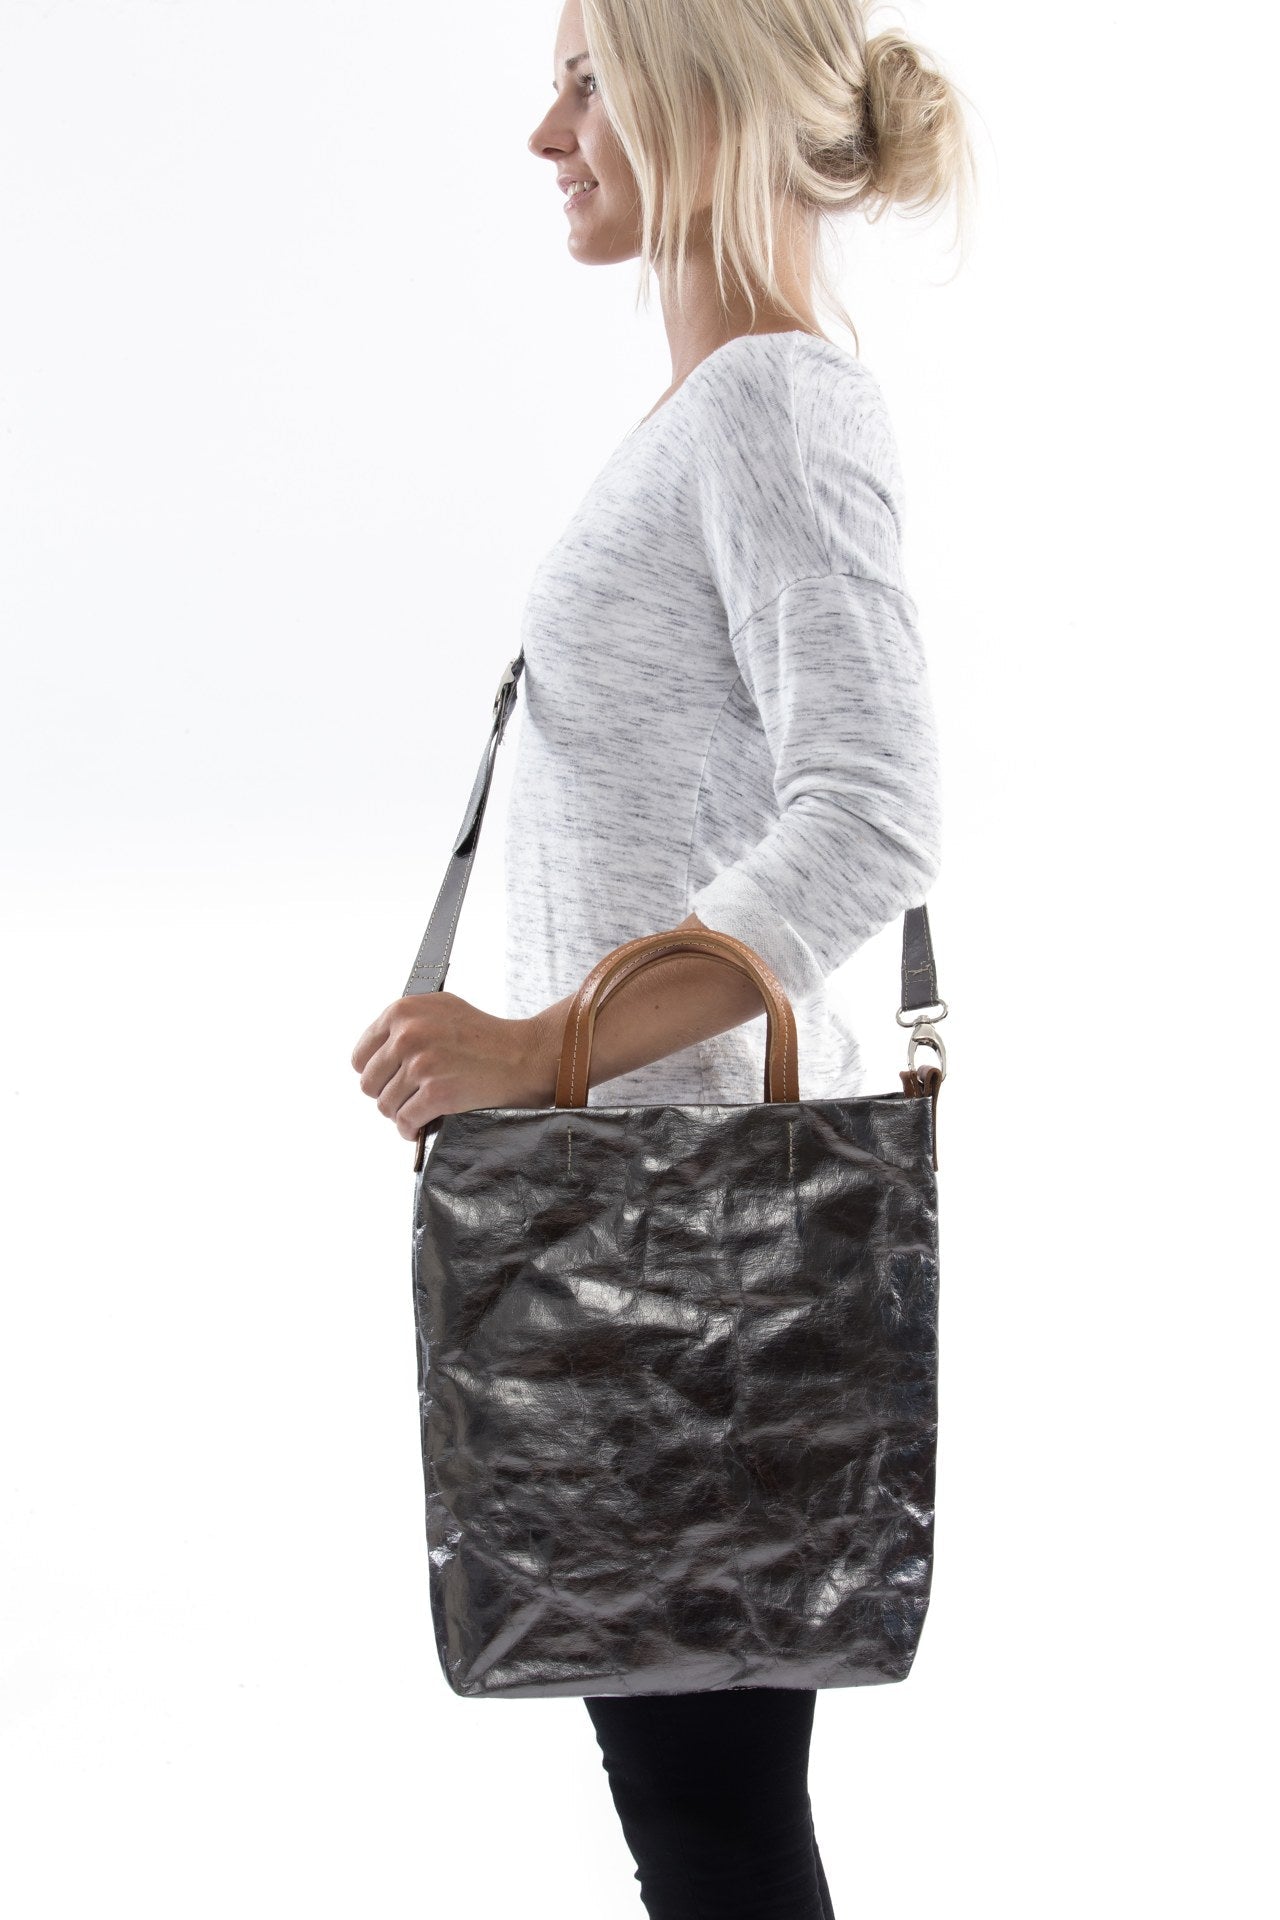 A blonde woman is shown from the side wearing casual clothing. She wears a crossbody washable paper tote bag with top handles. It is metallic pewter in colour.